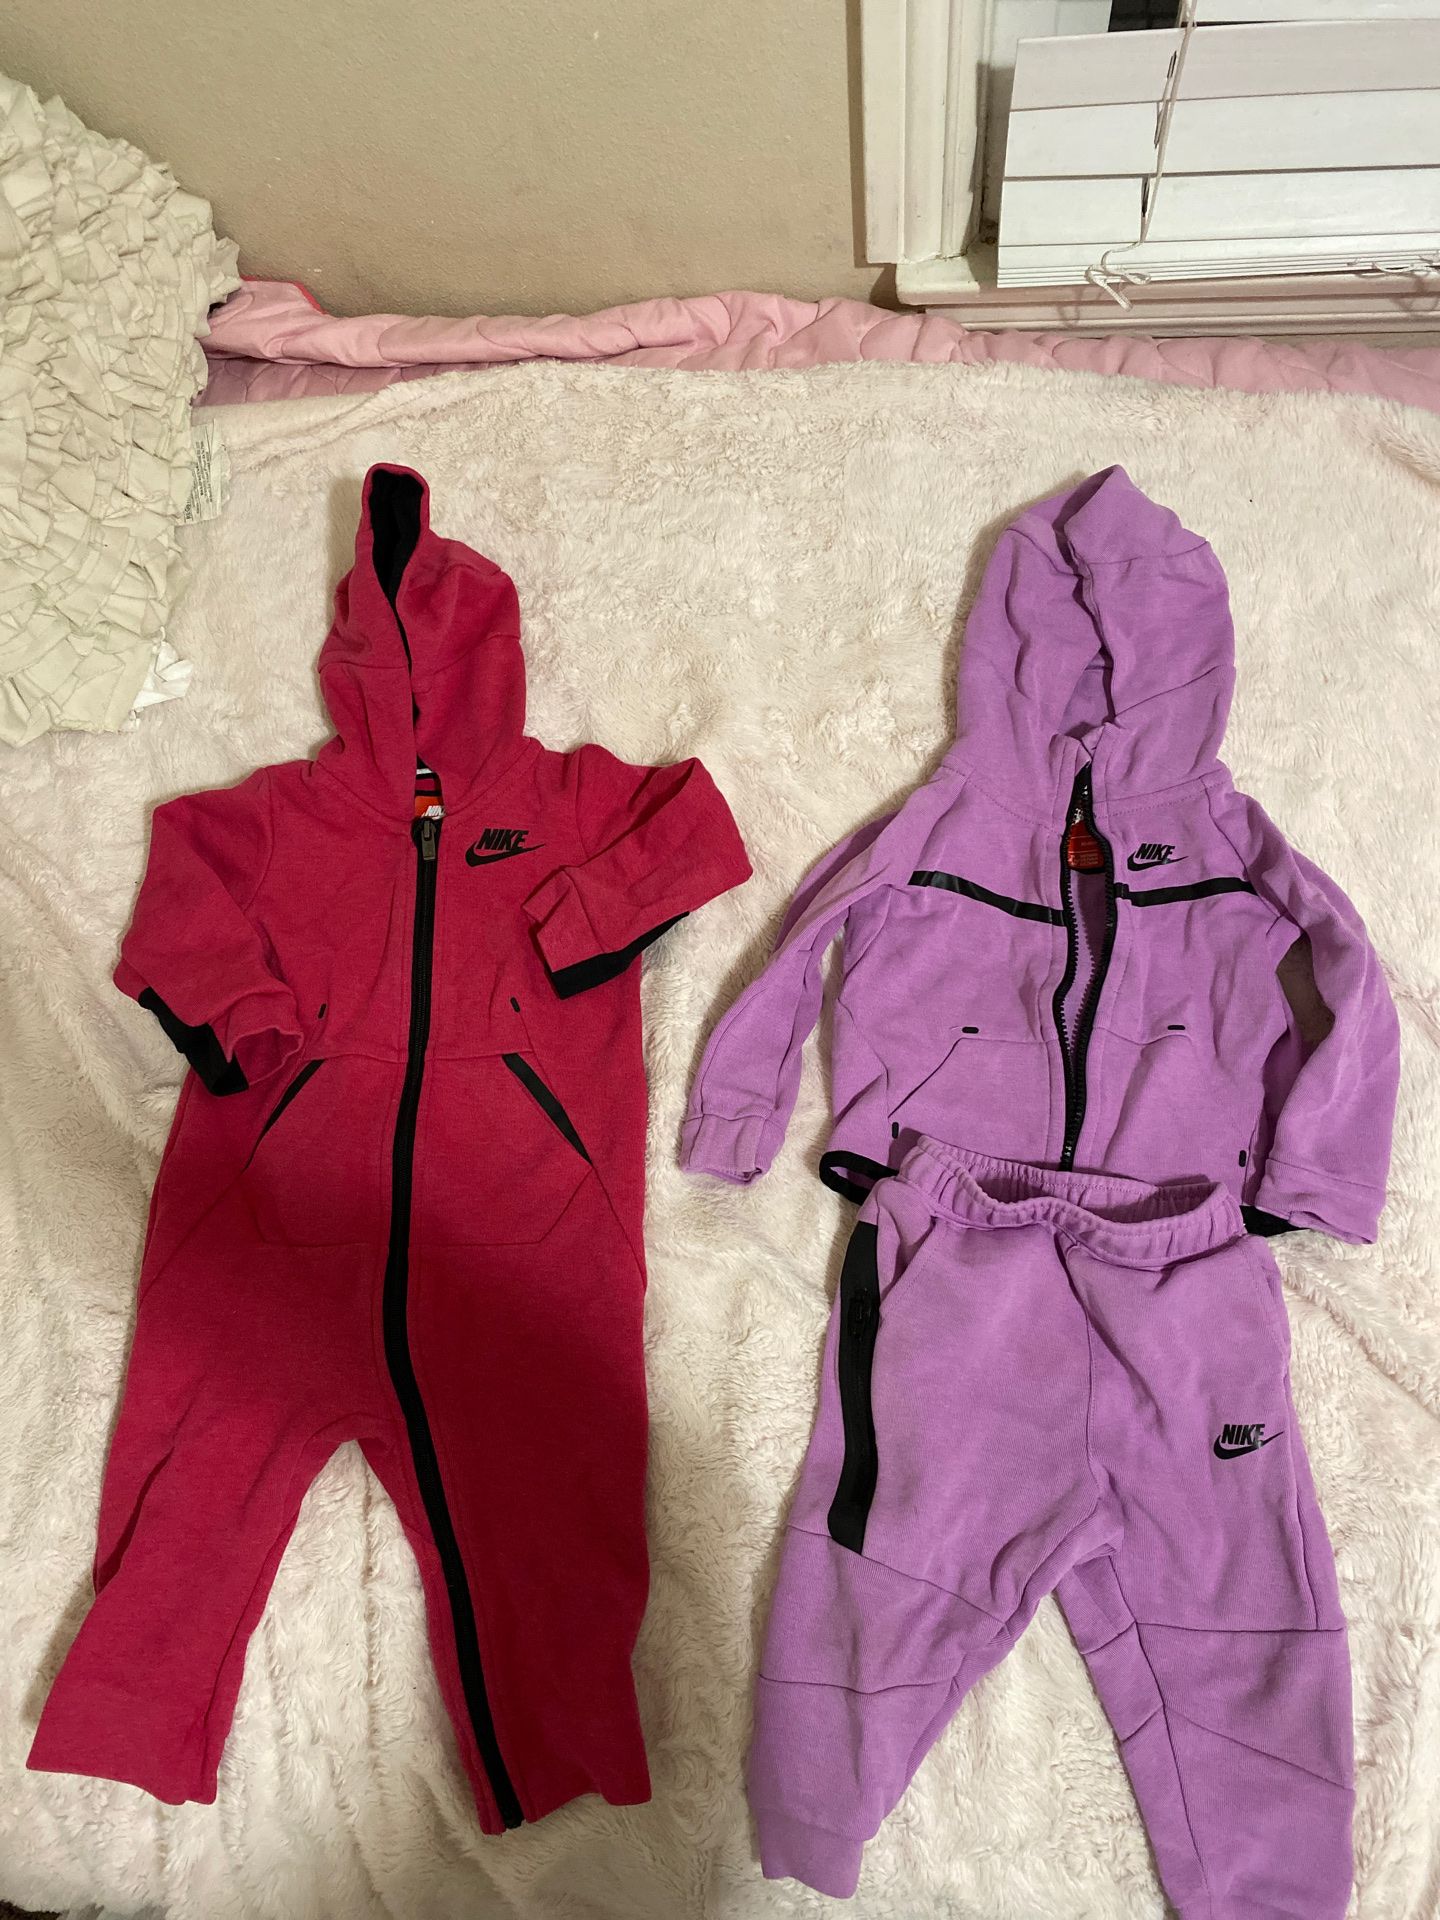 Nike tracksuits size 18months